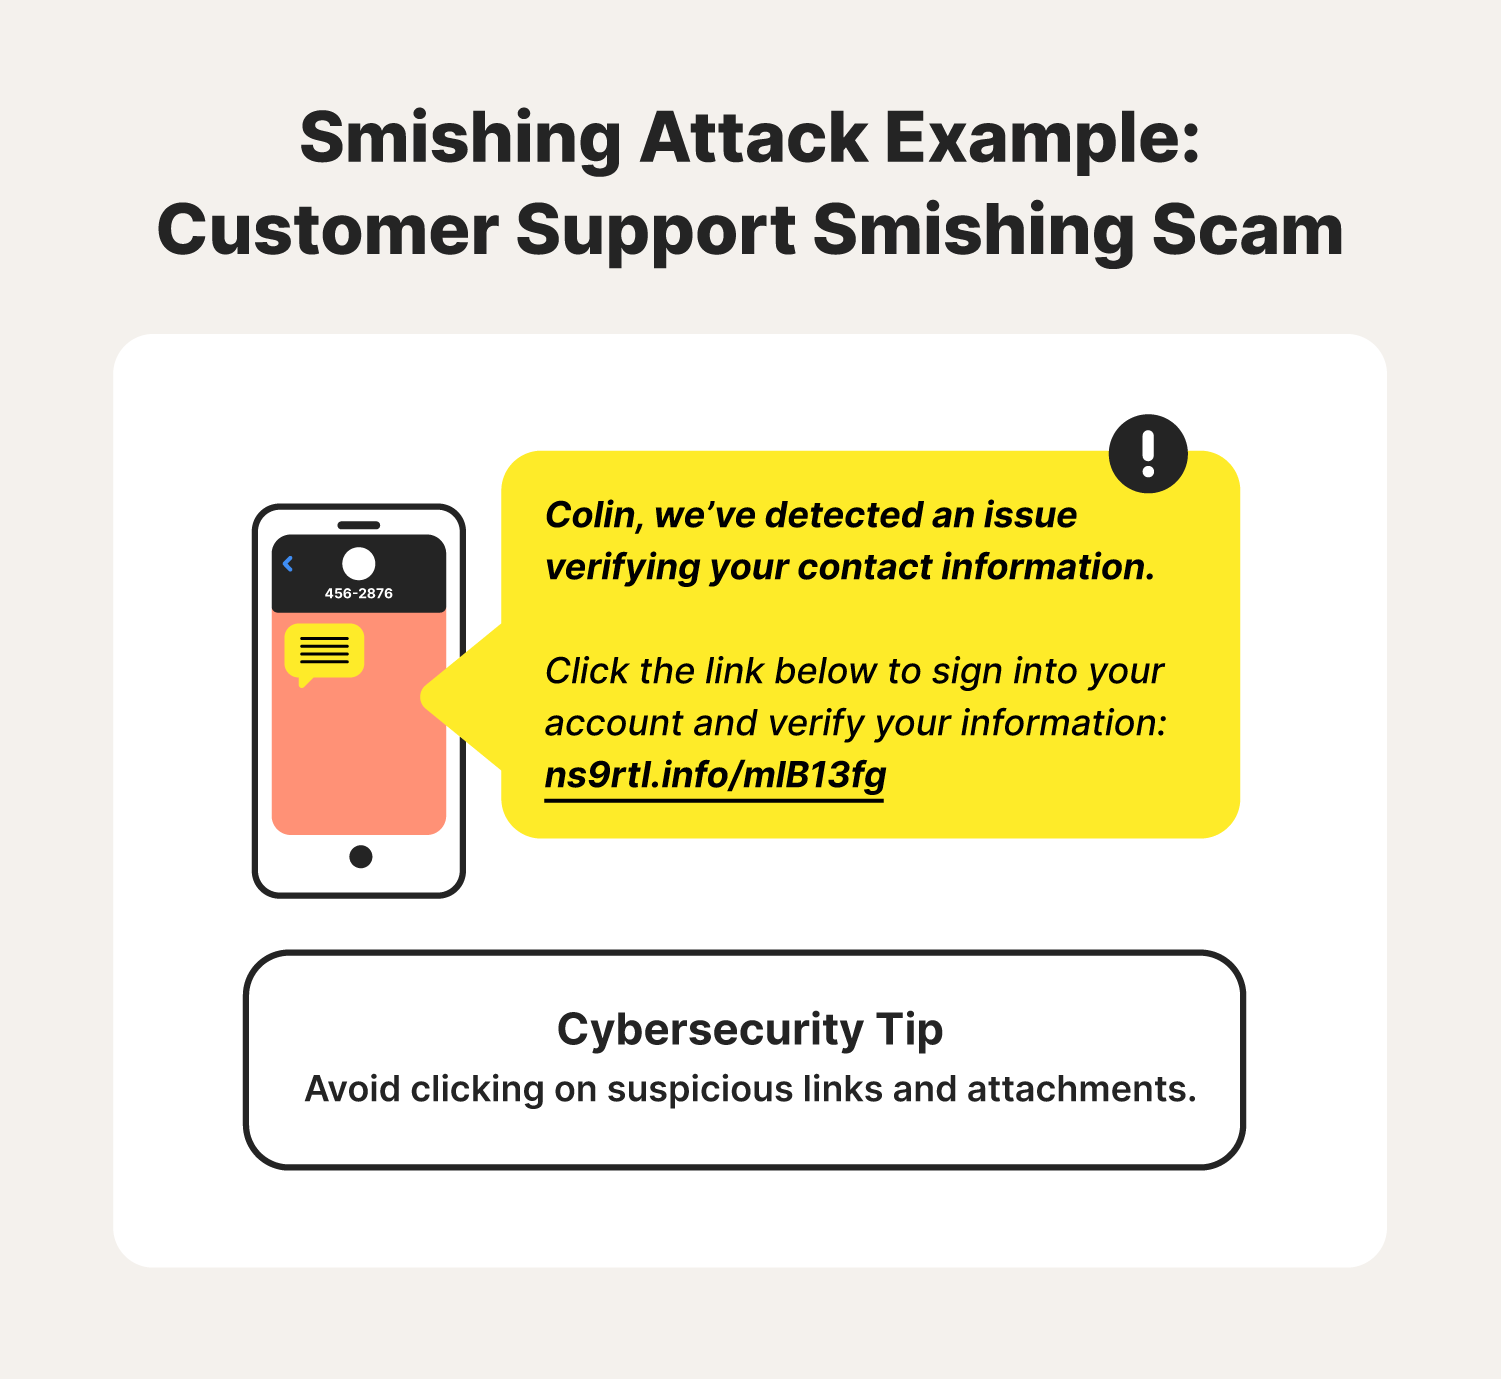 An illustration accompanies an example of a customer support smishing scam paired with a smishing attack protection tip.